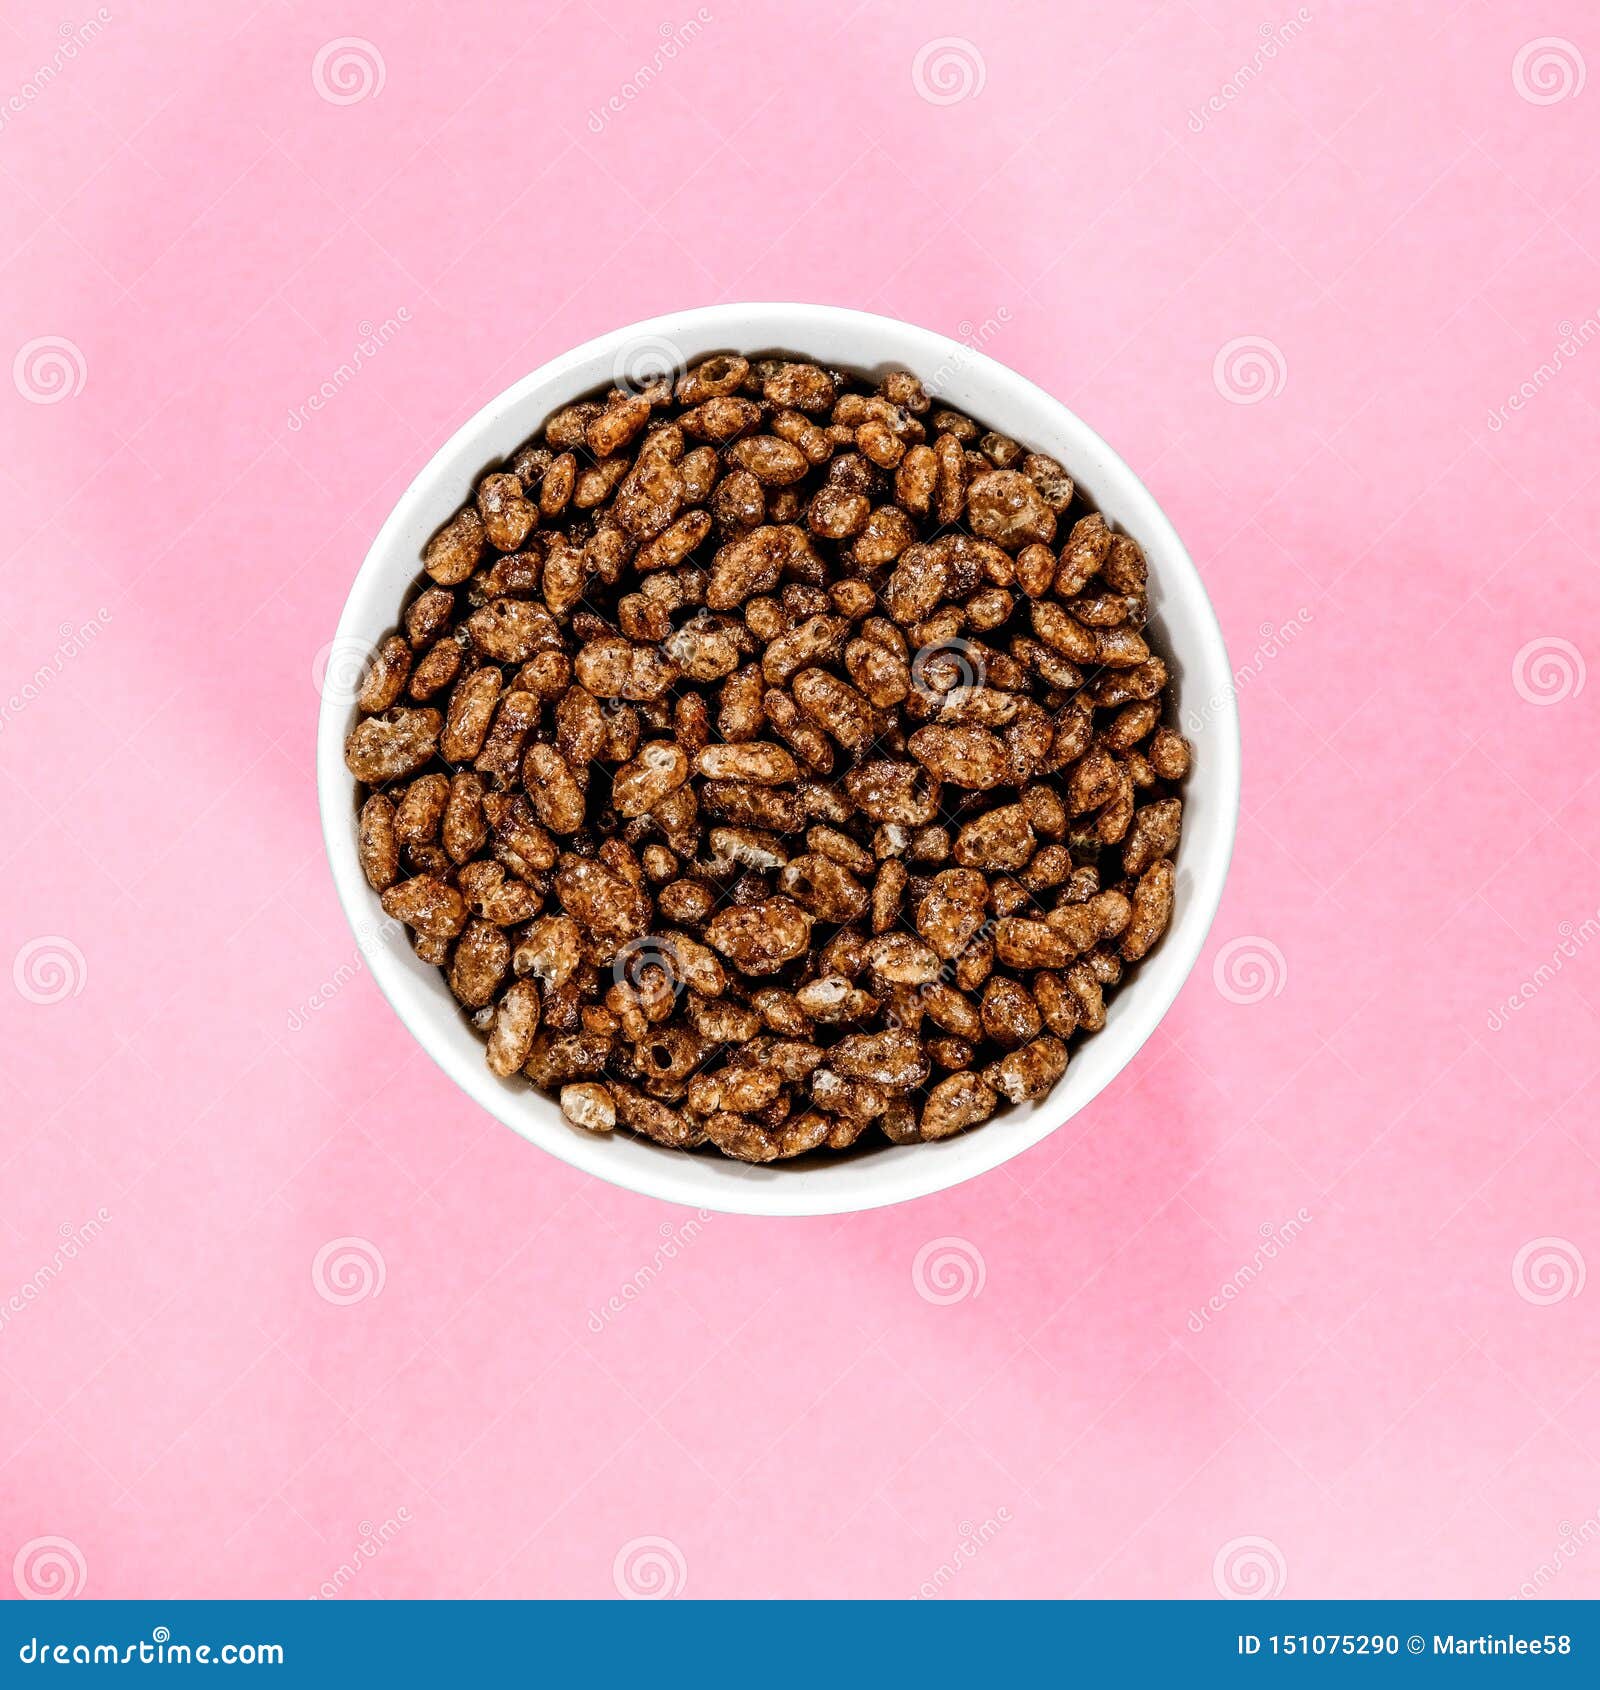 bowl of chocolate flavoured coco pops breakfast cereals